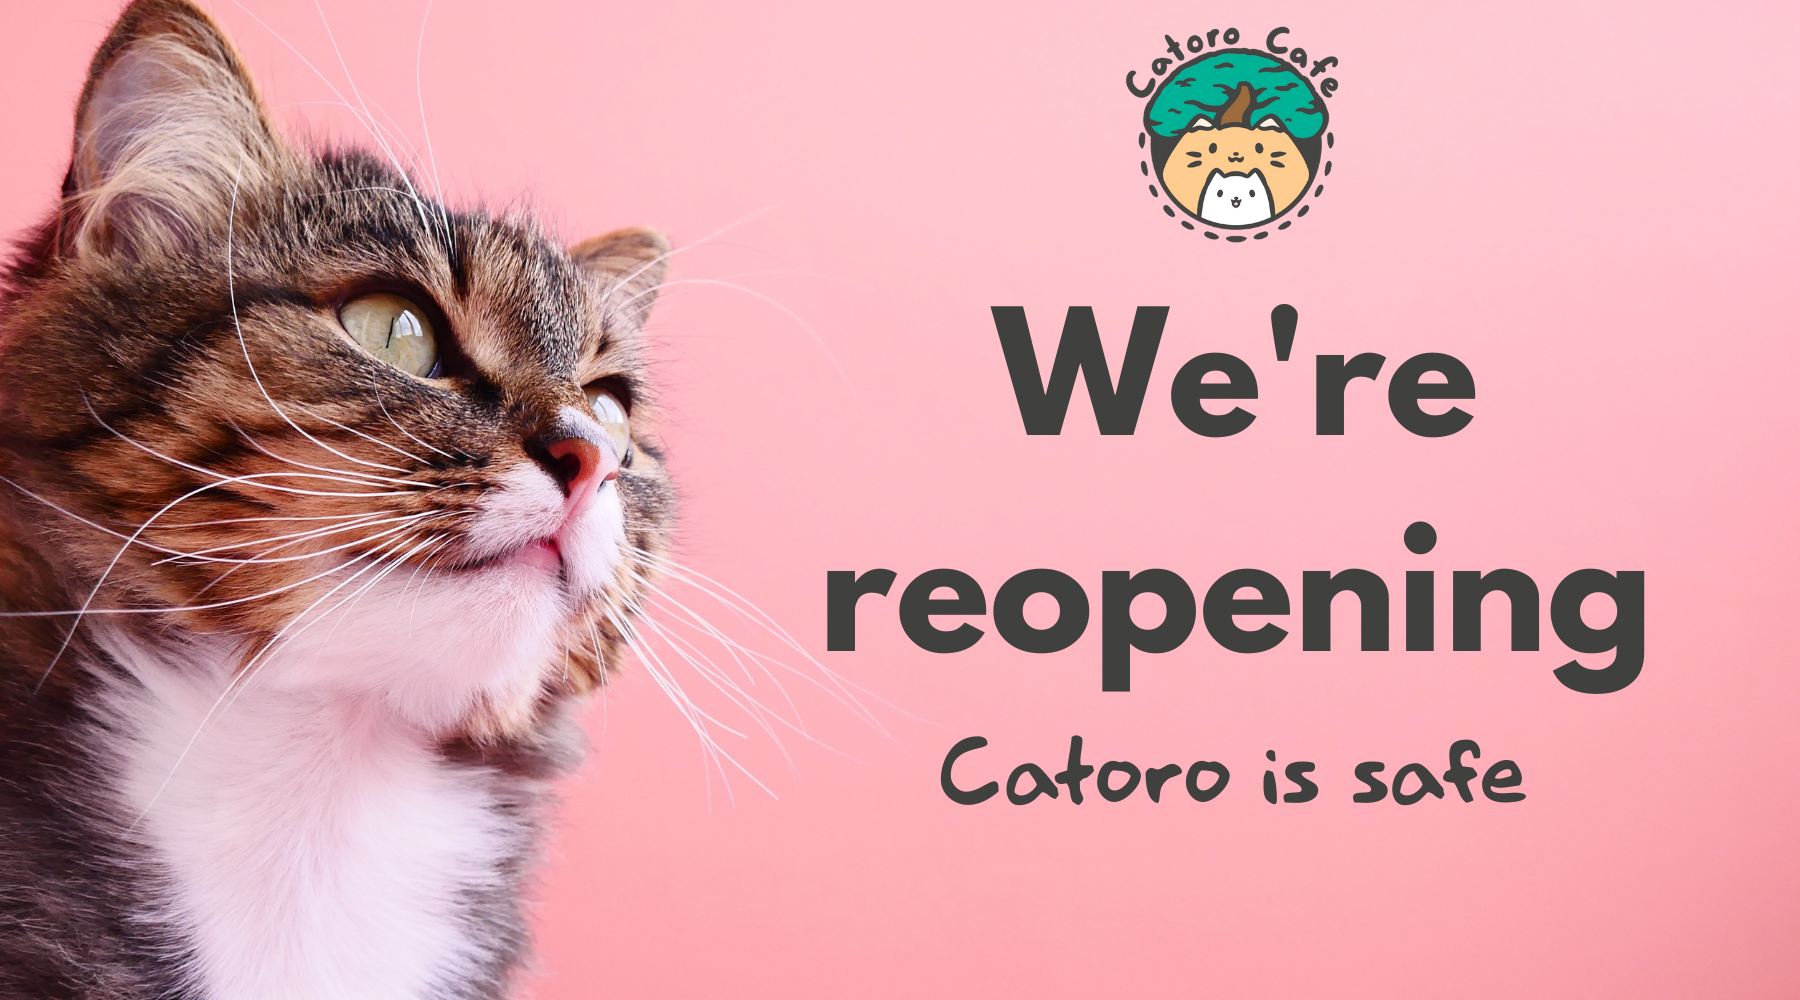 Catoro is Safe - We're Reopening